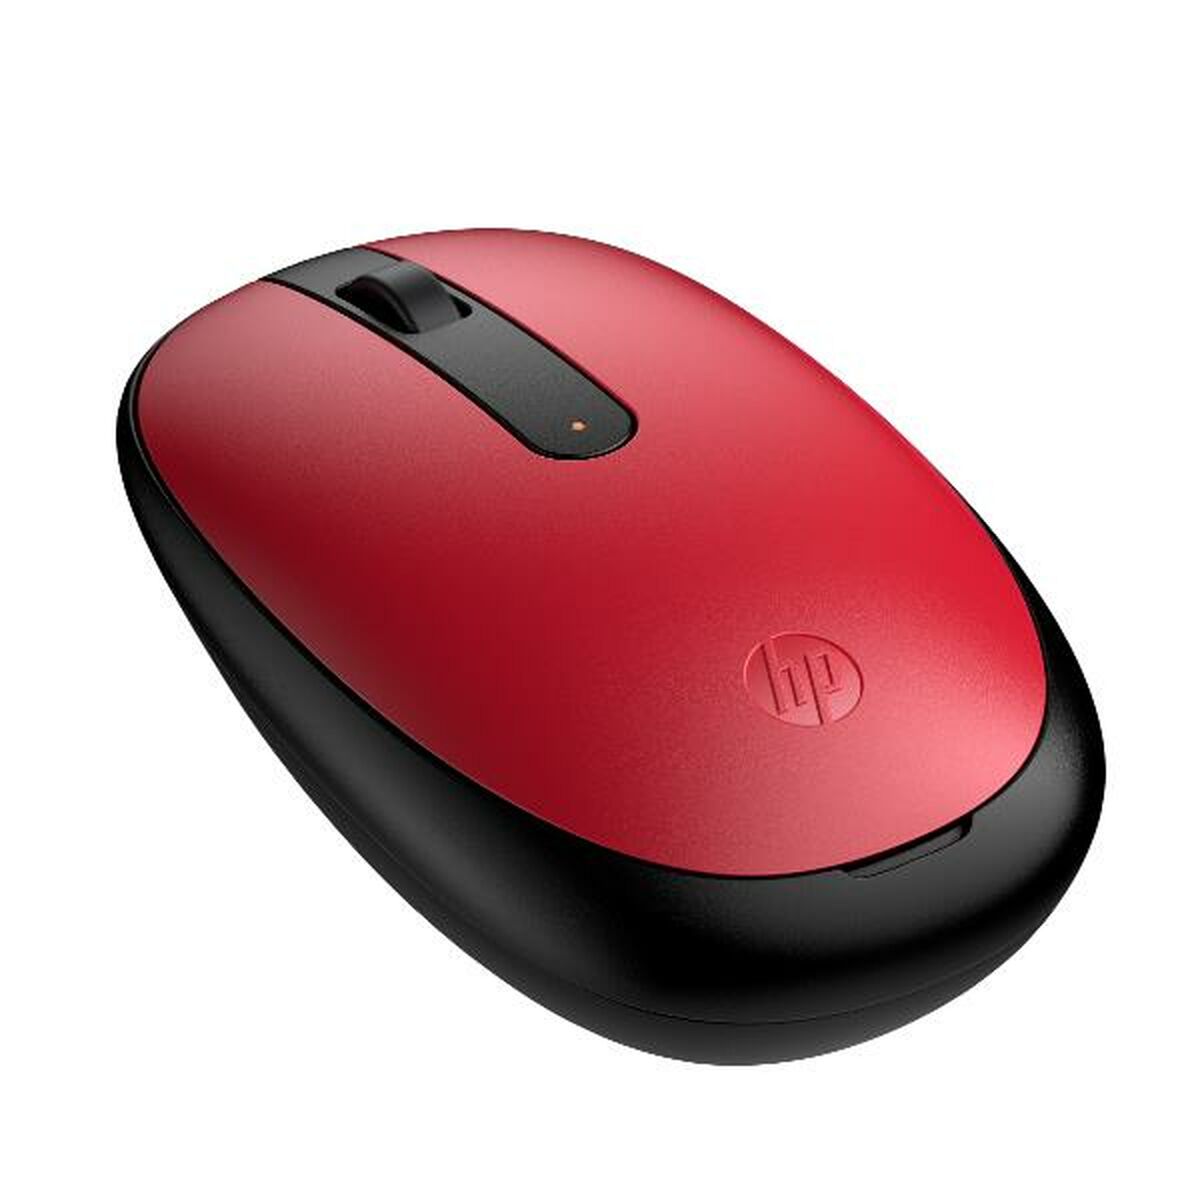 Optical Wireless Mouse HP 240 Red, HP, Computing, Accessories, optical-wireless-mouse-hp-240-red, Brand_HP, category-reference-2609, category-reference-2642, category-reference-2656, category-reference-t-19685, category-reference-t-19908, category-reference-t-21353, category-reference-t-25626, computers / peripherals, Condition_NEW, office, Price_20 - 50, Teleworking, RiotNook